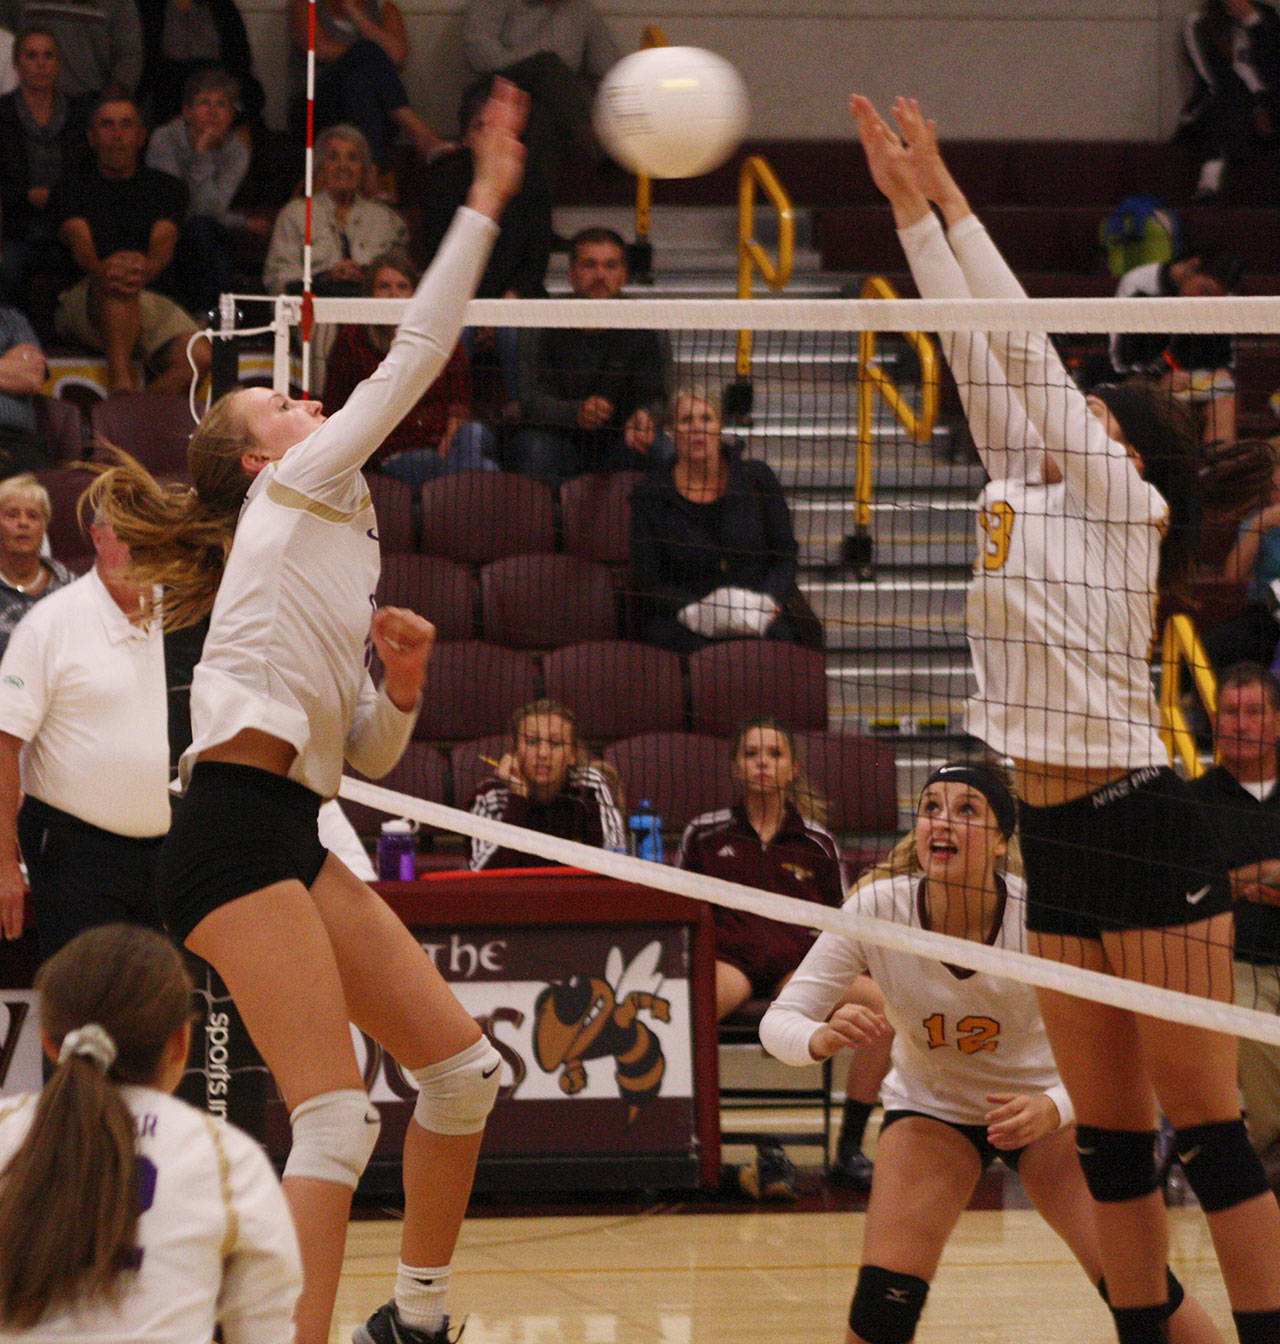 Sumner sophomore Jordyn Manning goes for the kill, while Hornet Lauren Hanson attempts to block. Photo by Kevin Hanson